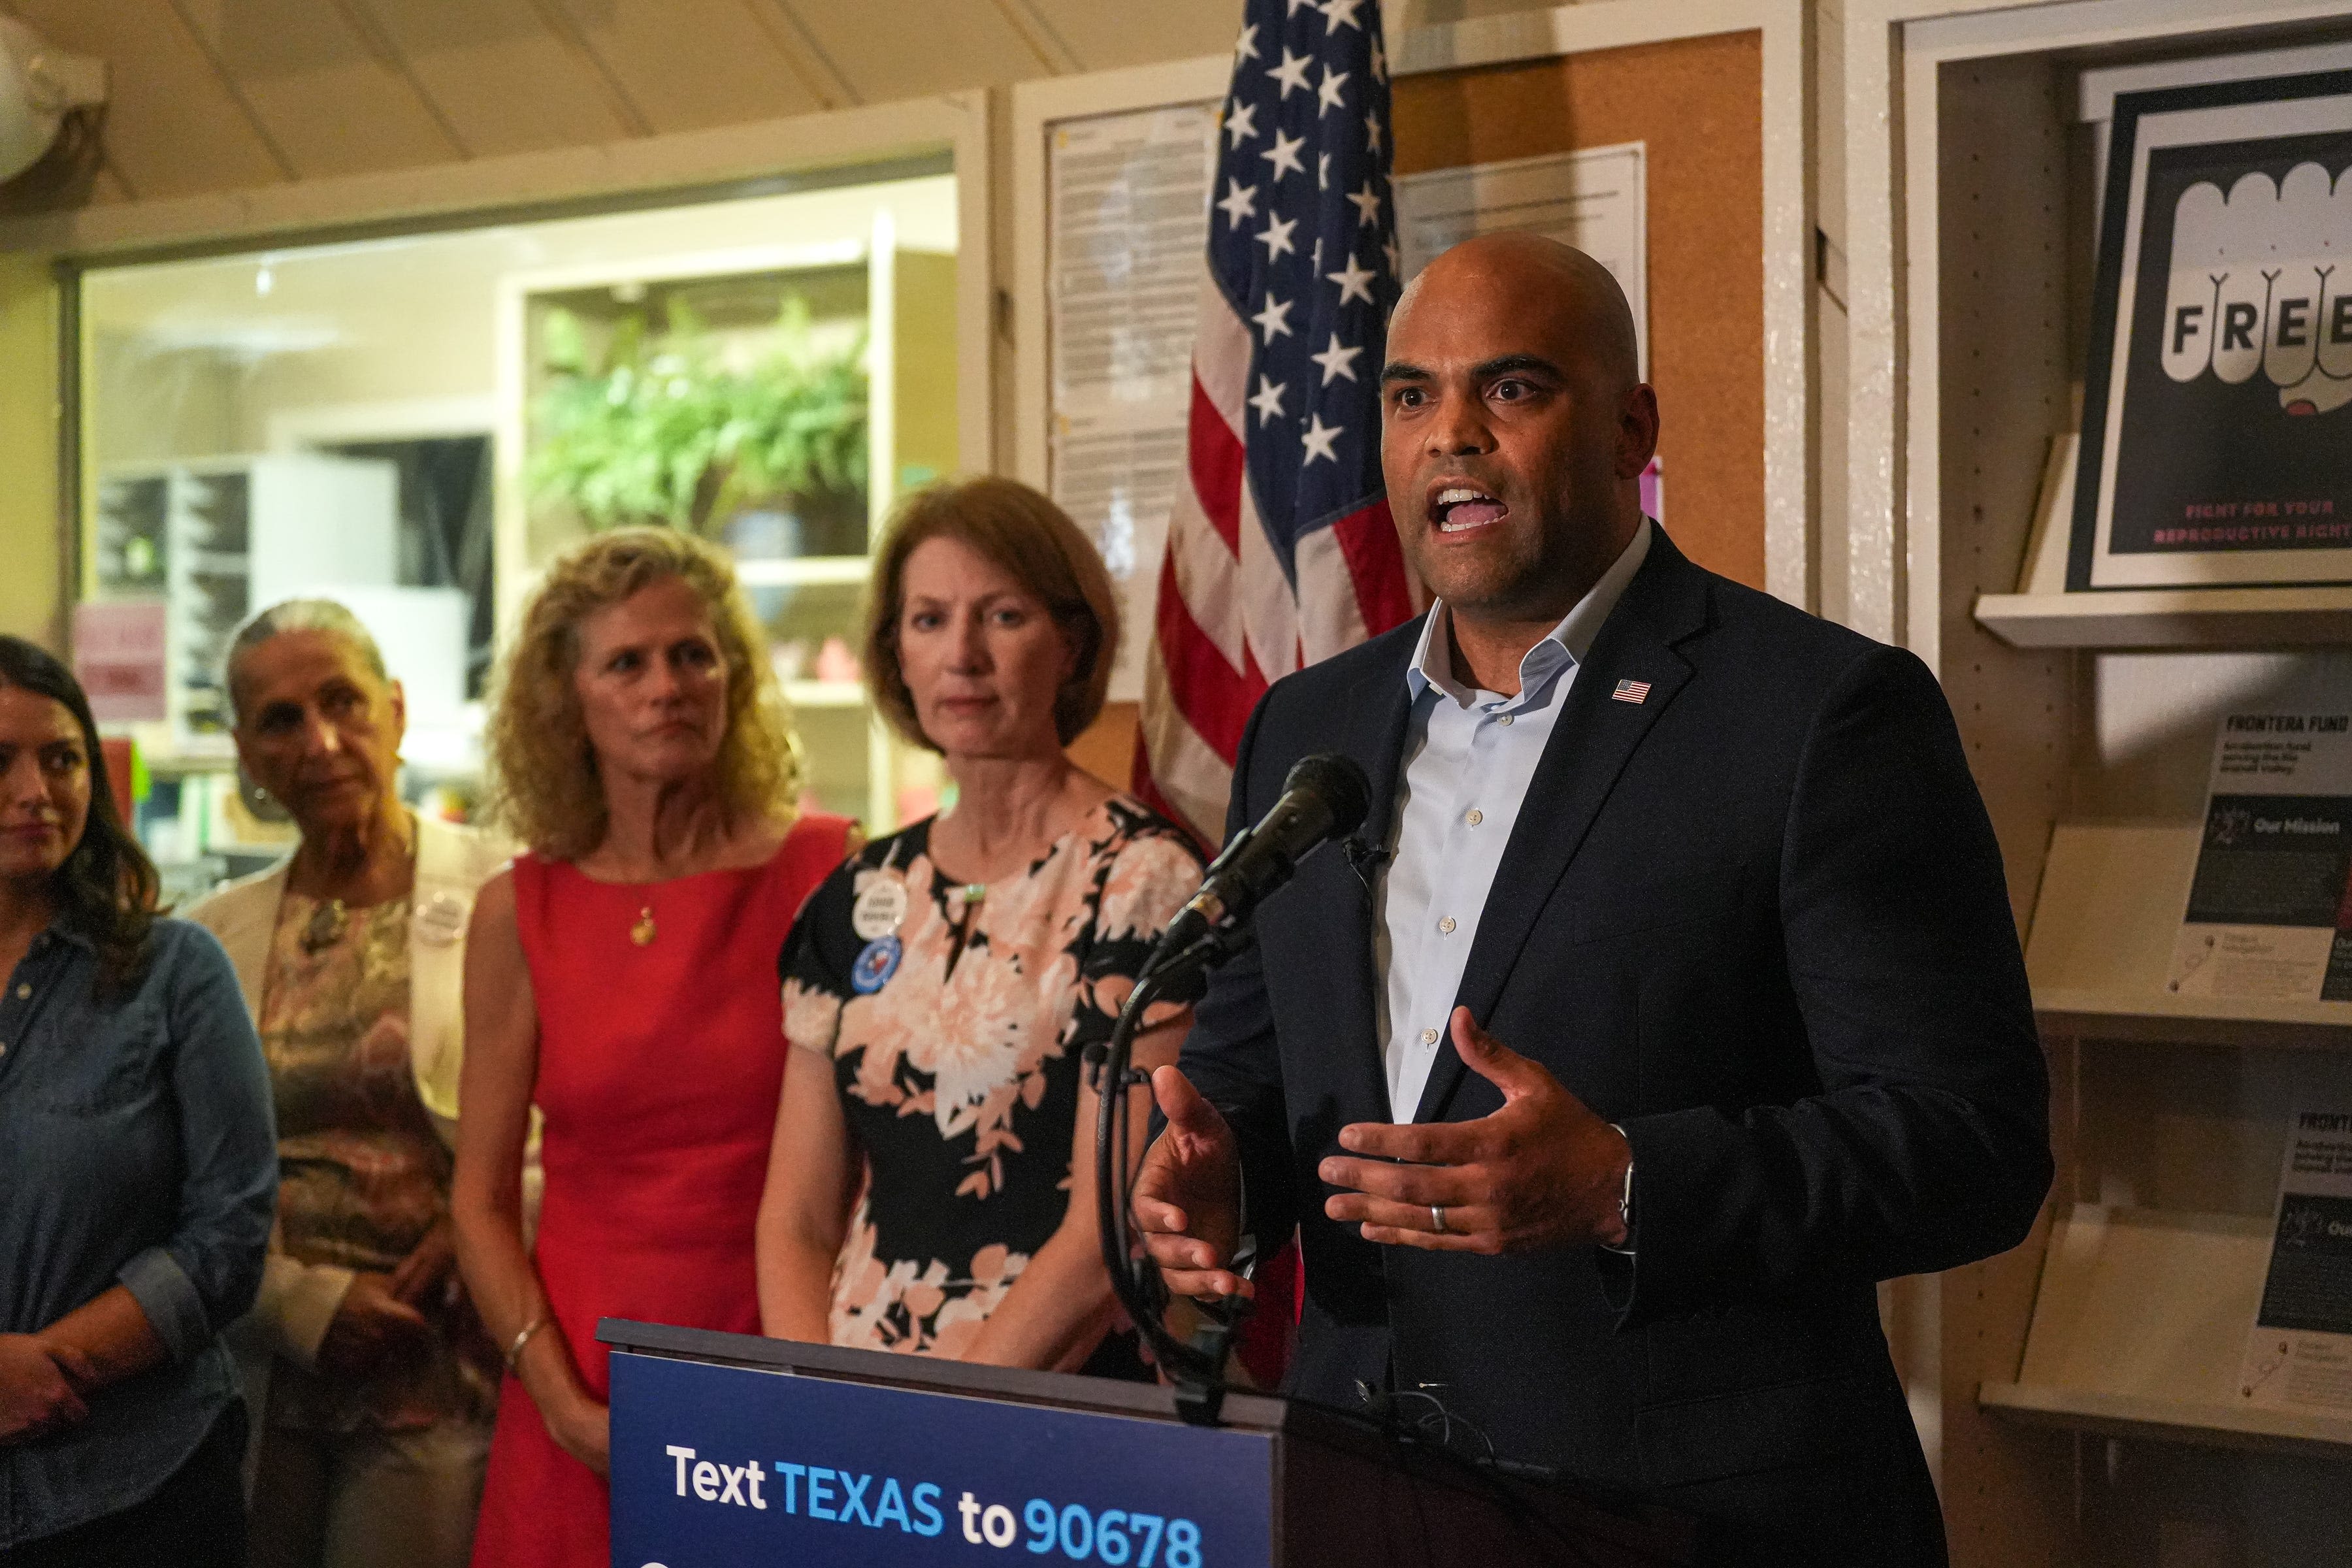 Senate hopeful Colin Allred sees abortion rights as winning issue in race against Ted Cruz